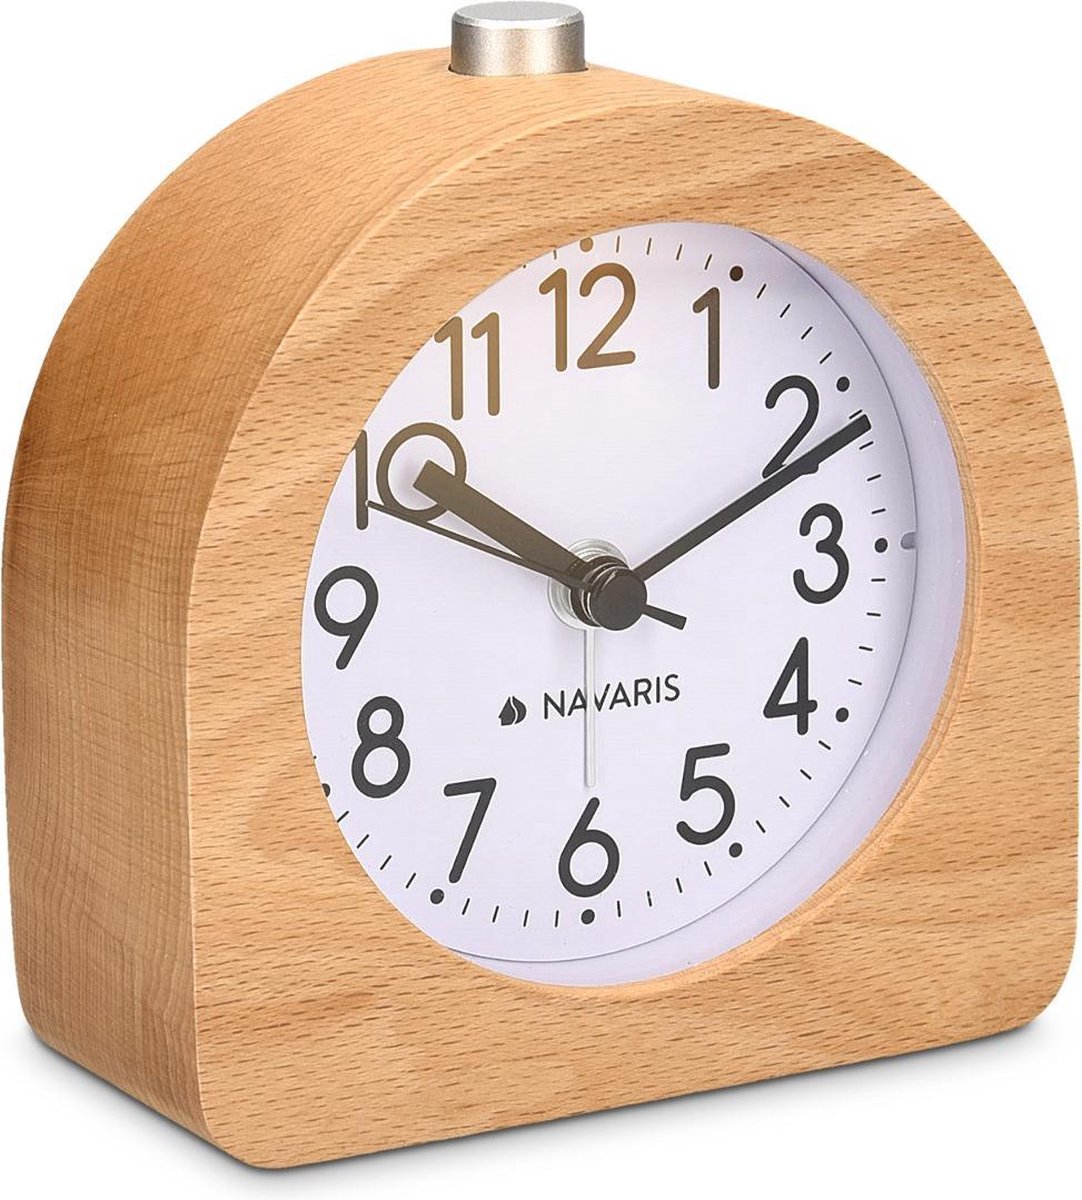 Navaris Analog Wooden Alarm Clock with Snooze Retro Clock Half Round with Dial Alarm Light Quiet Table Clock Without Ticking Natural Wood in Light Brown Light Brown